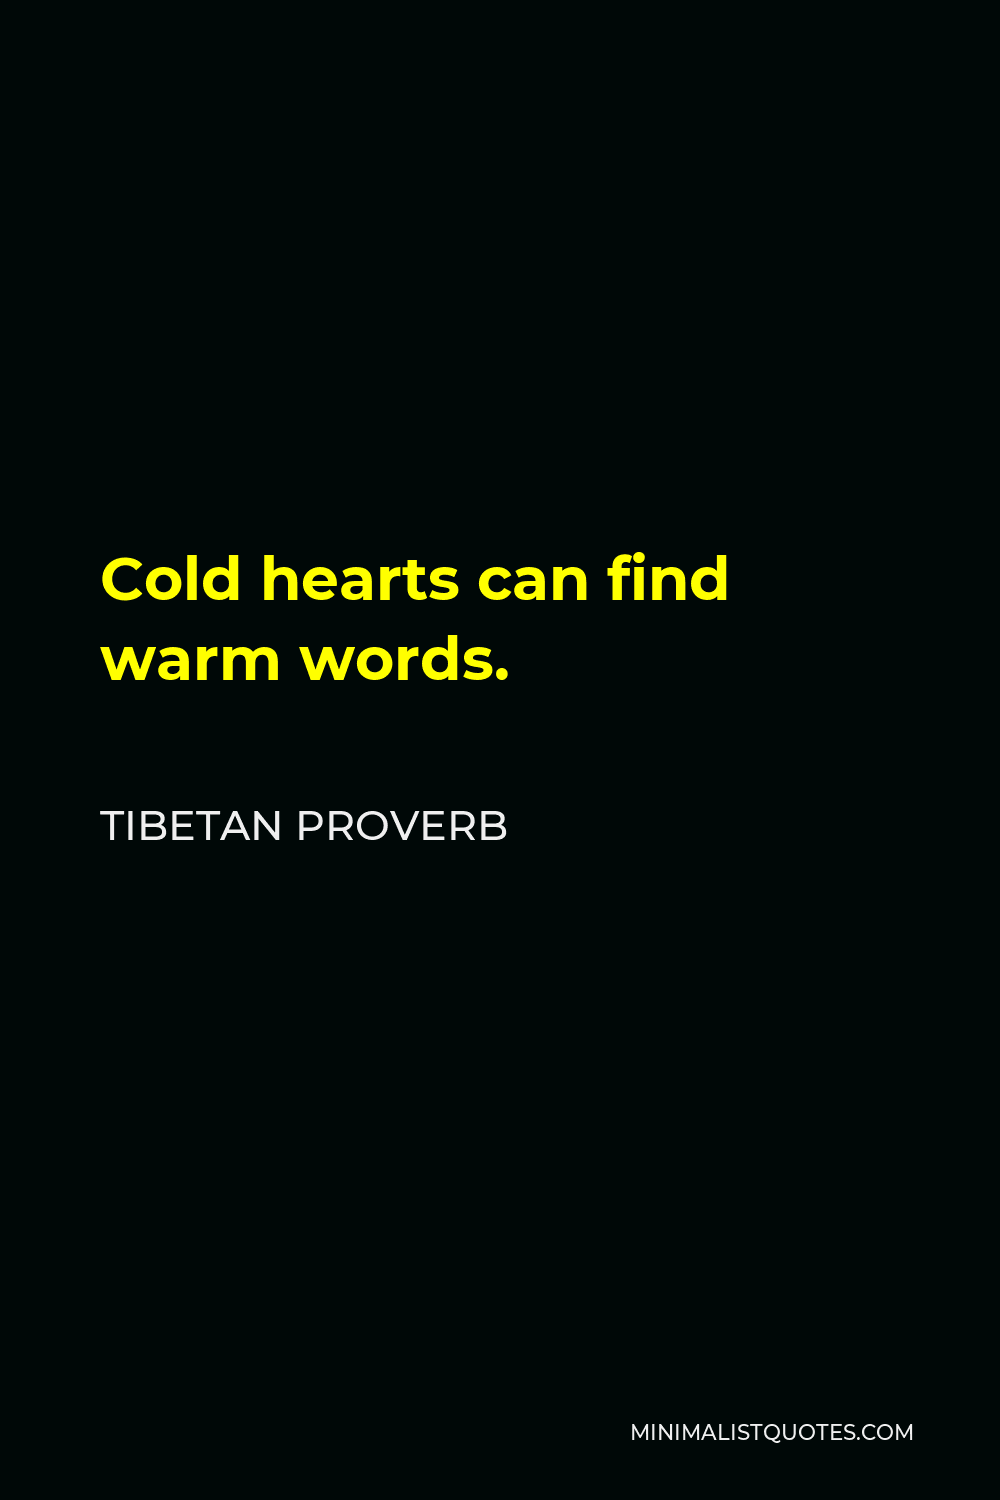 Tibetan Proverb Quote - Cold hearts can find warm words.